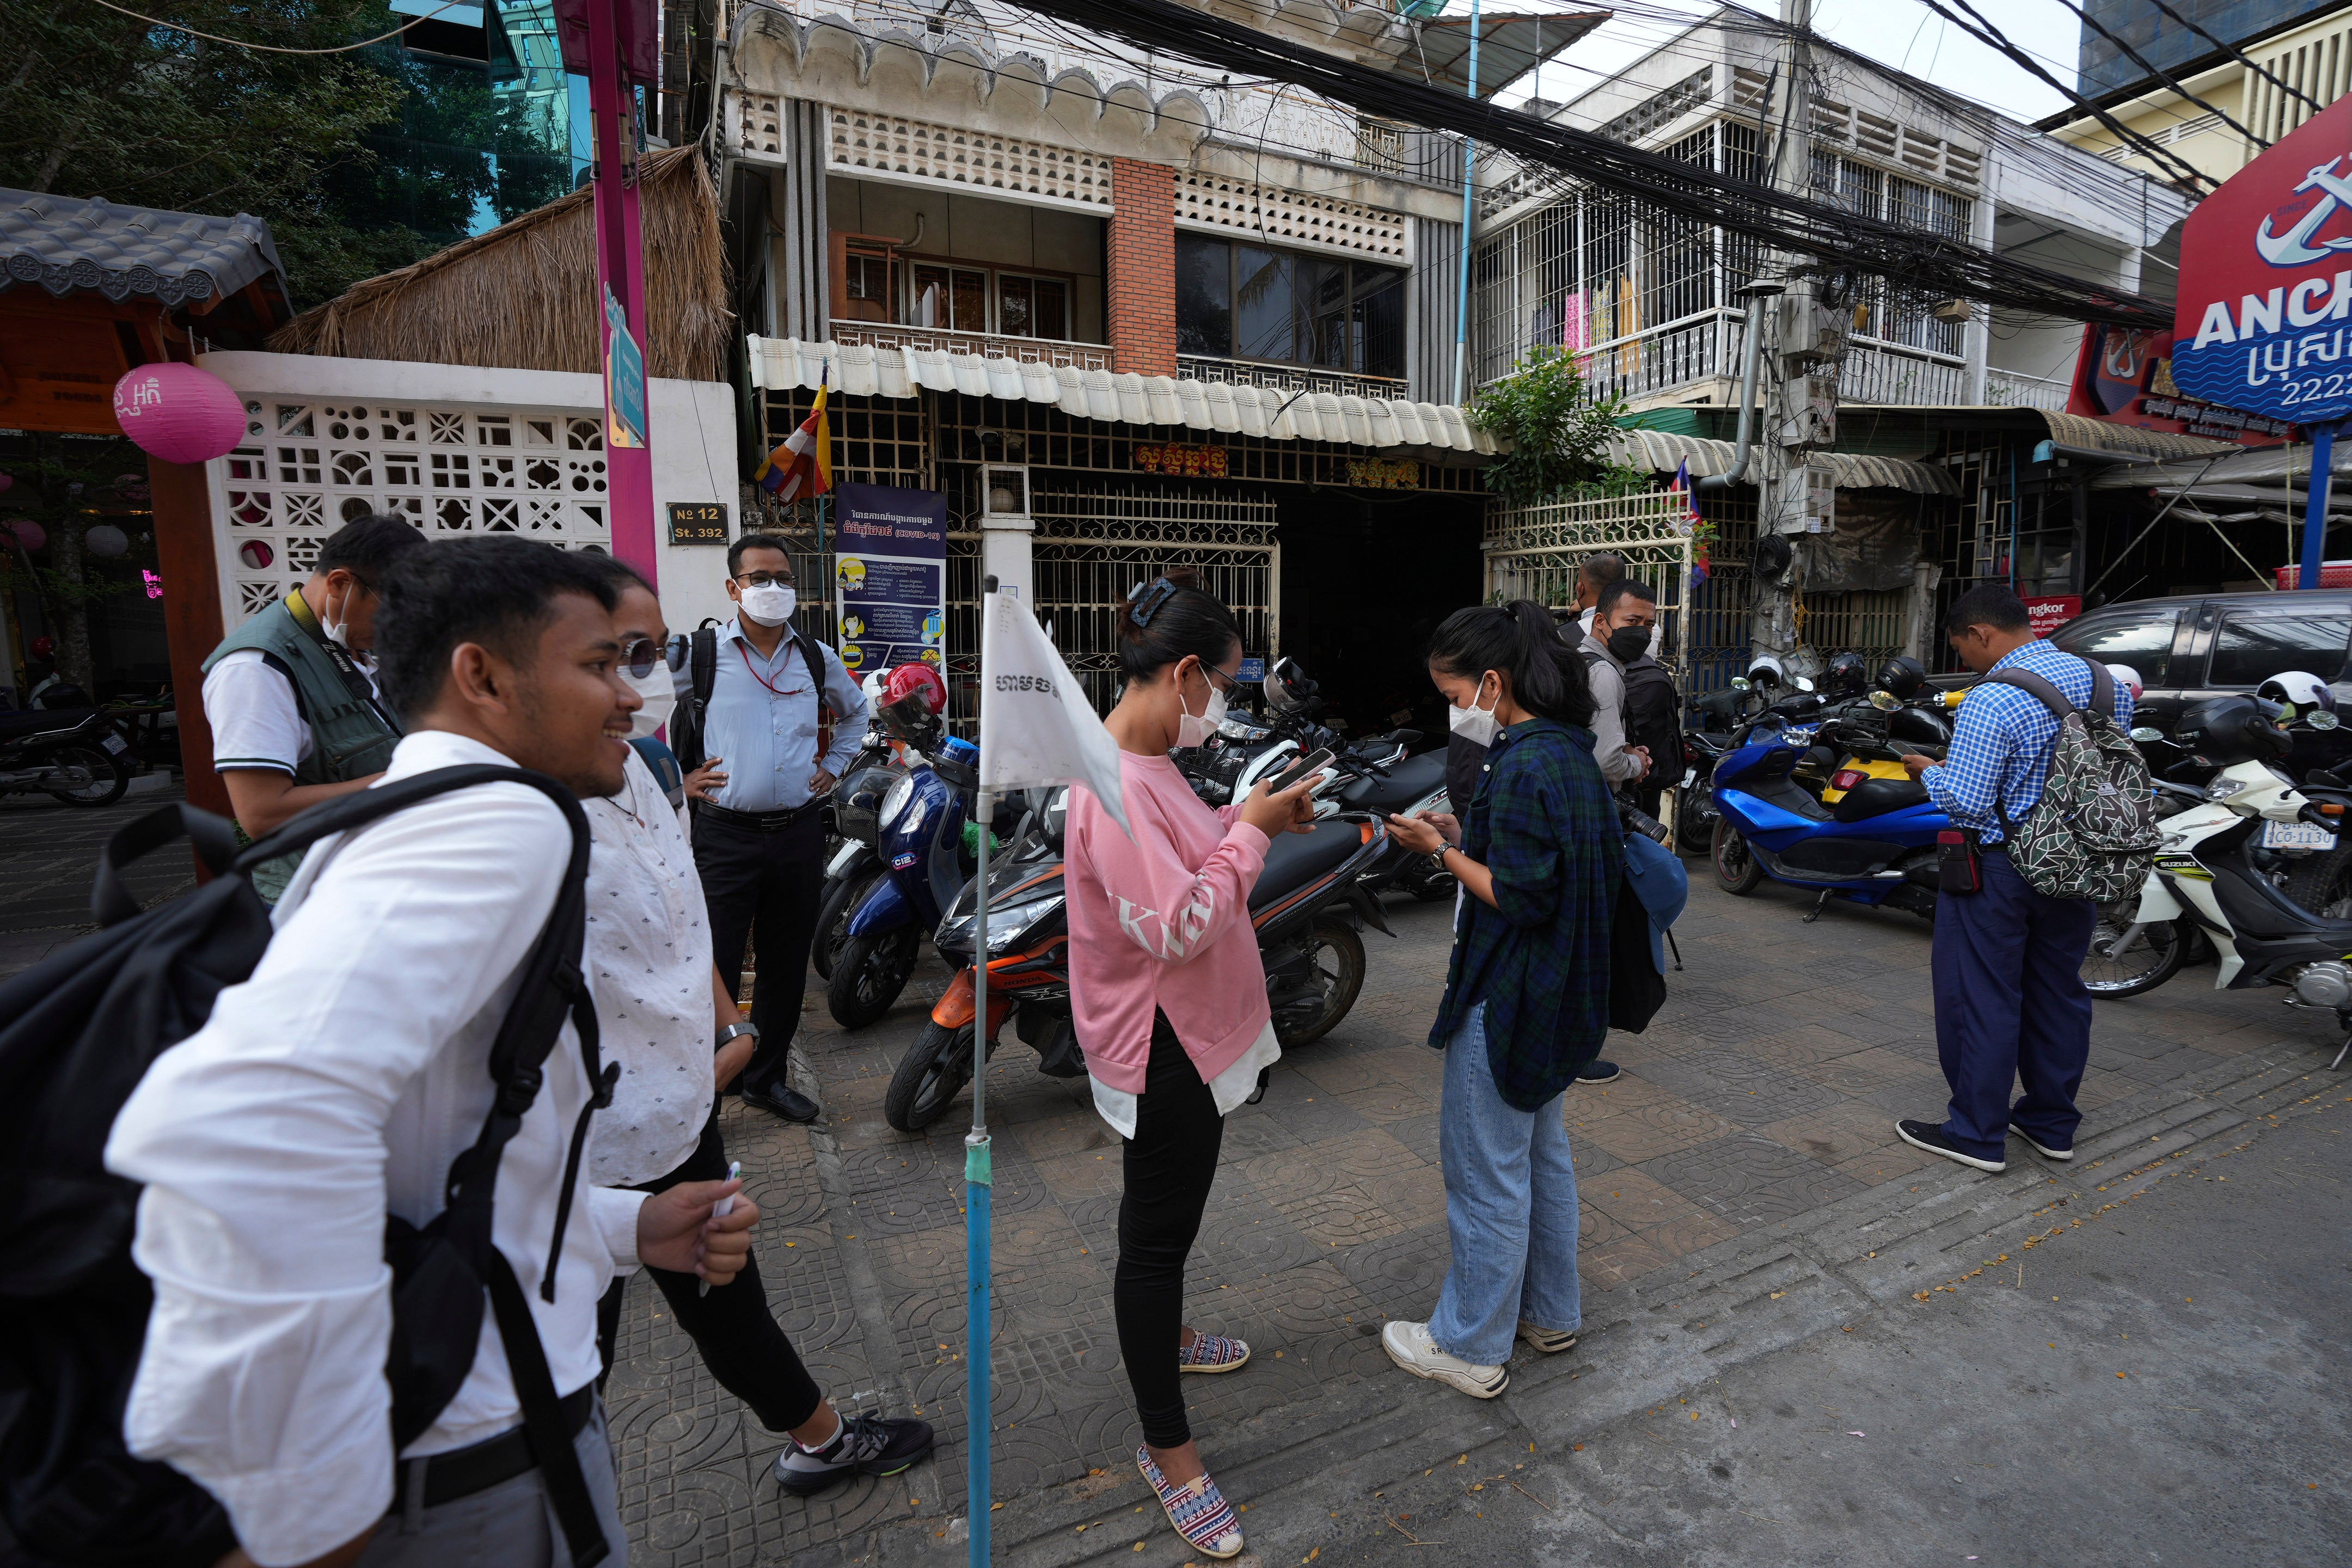 Journalists gather in front of the Voice of Democracy (VOD) office in Phnom Penh Cambodia on Monday, 13 February 2023